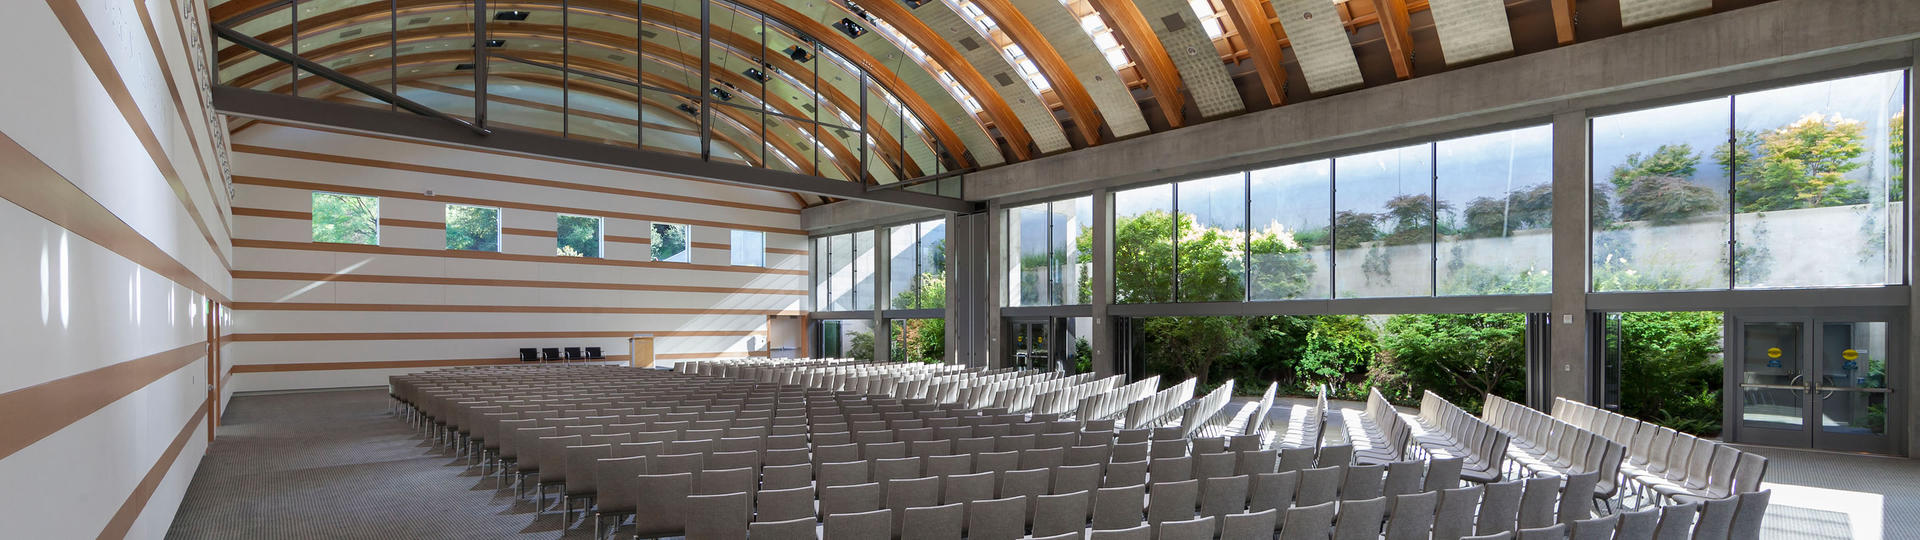 Guerin Pavilion interior showing theater seating set-up